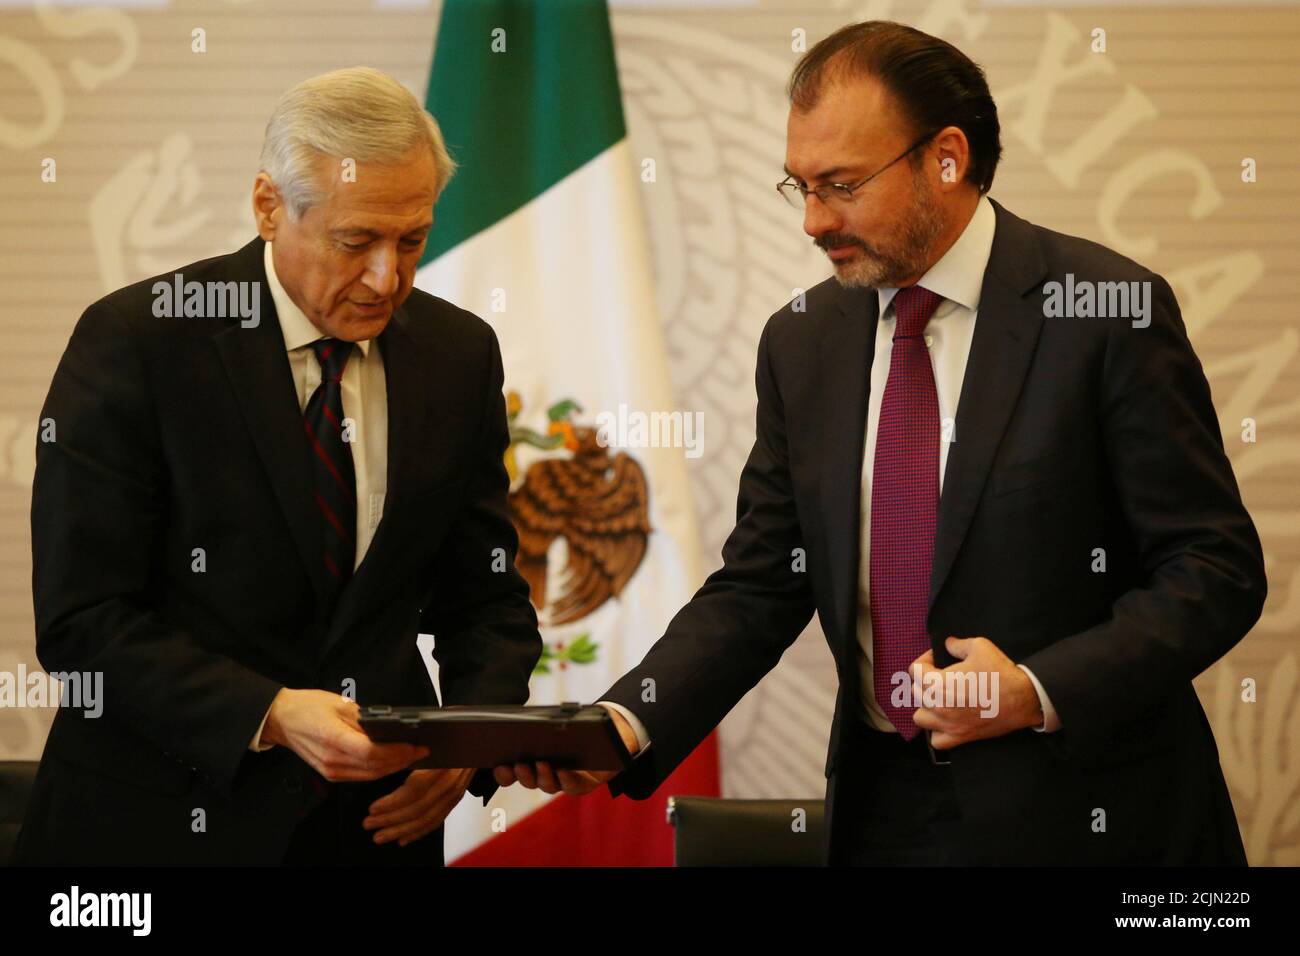 Chile's Foreign Minister Heraldo Munoz (L) gives a document to Mexico's Foreign Minister Luis Videgaray (R) during the XVII meeting of Council Ministers of the Pacific Alliance, in Mexico City, Mexico, June 2, 2017. REUTERS/Edgard Garrido Stock Photo